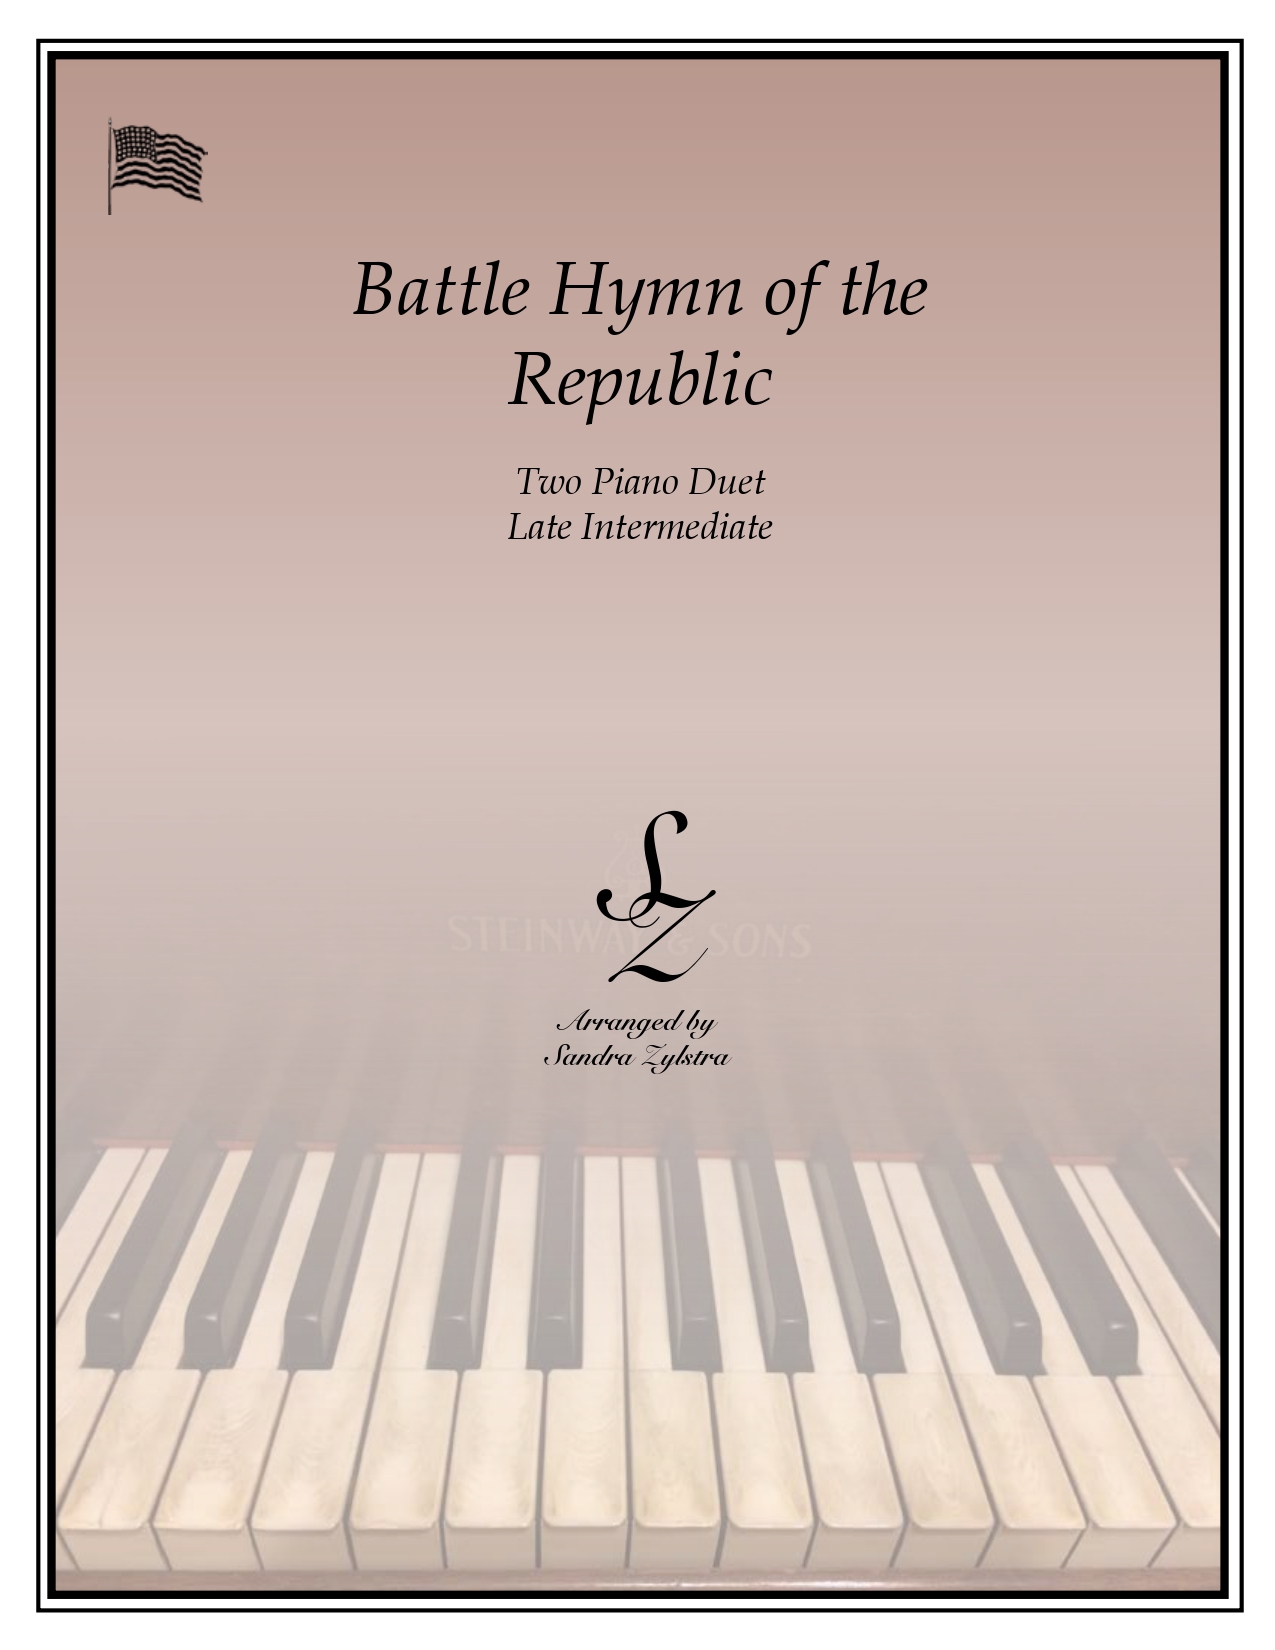 Battle Hymn Of The Republic Duet cover page 00011